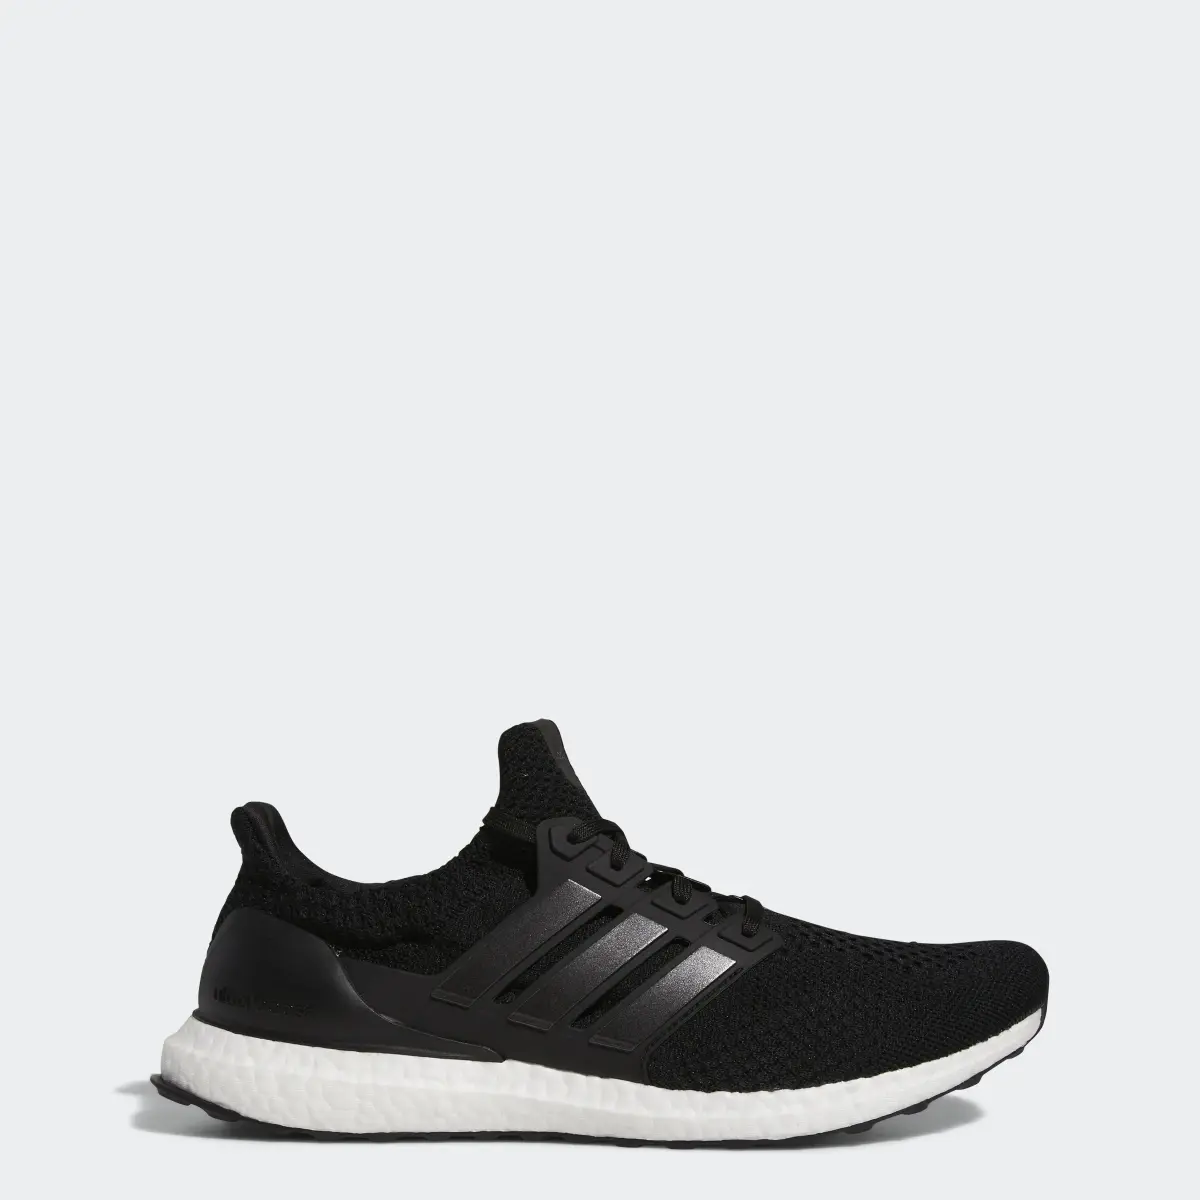 Adidas Ultraboost 5 DNA Running Lifestyle Shoes. 1